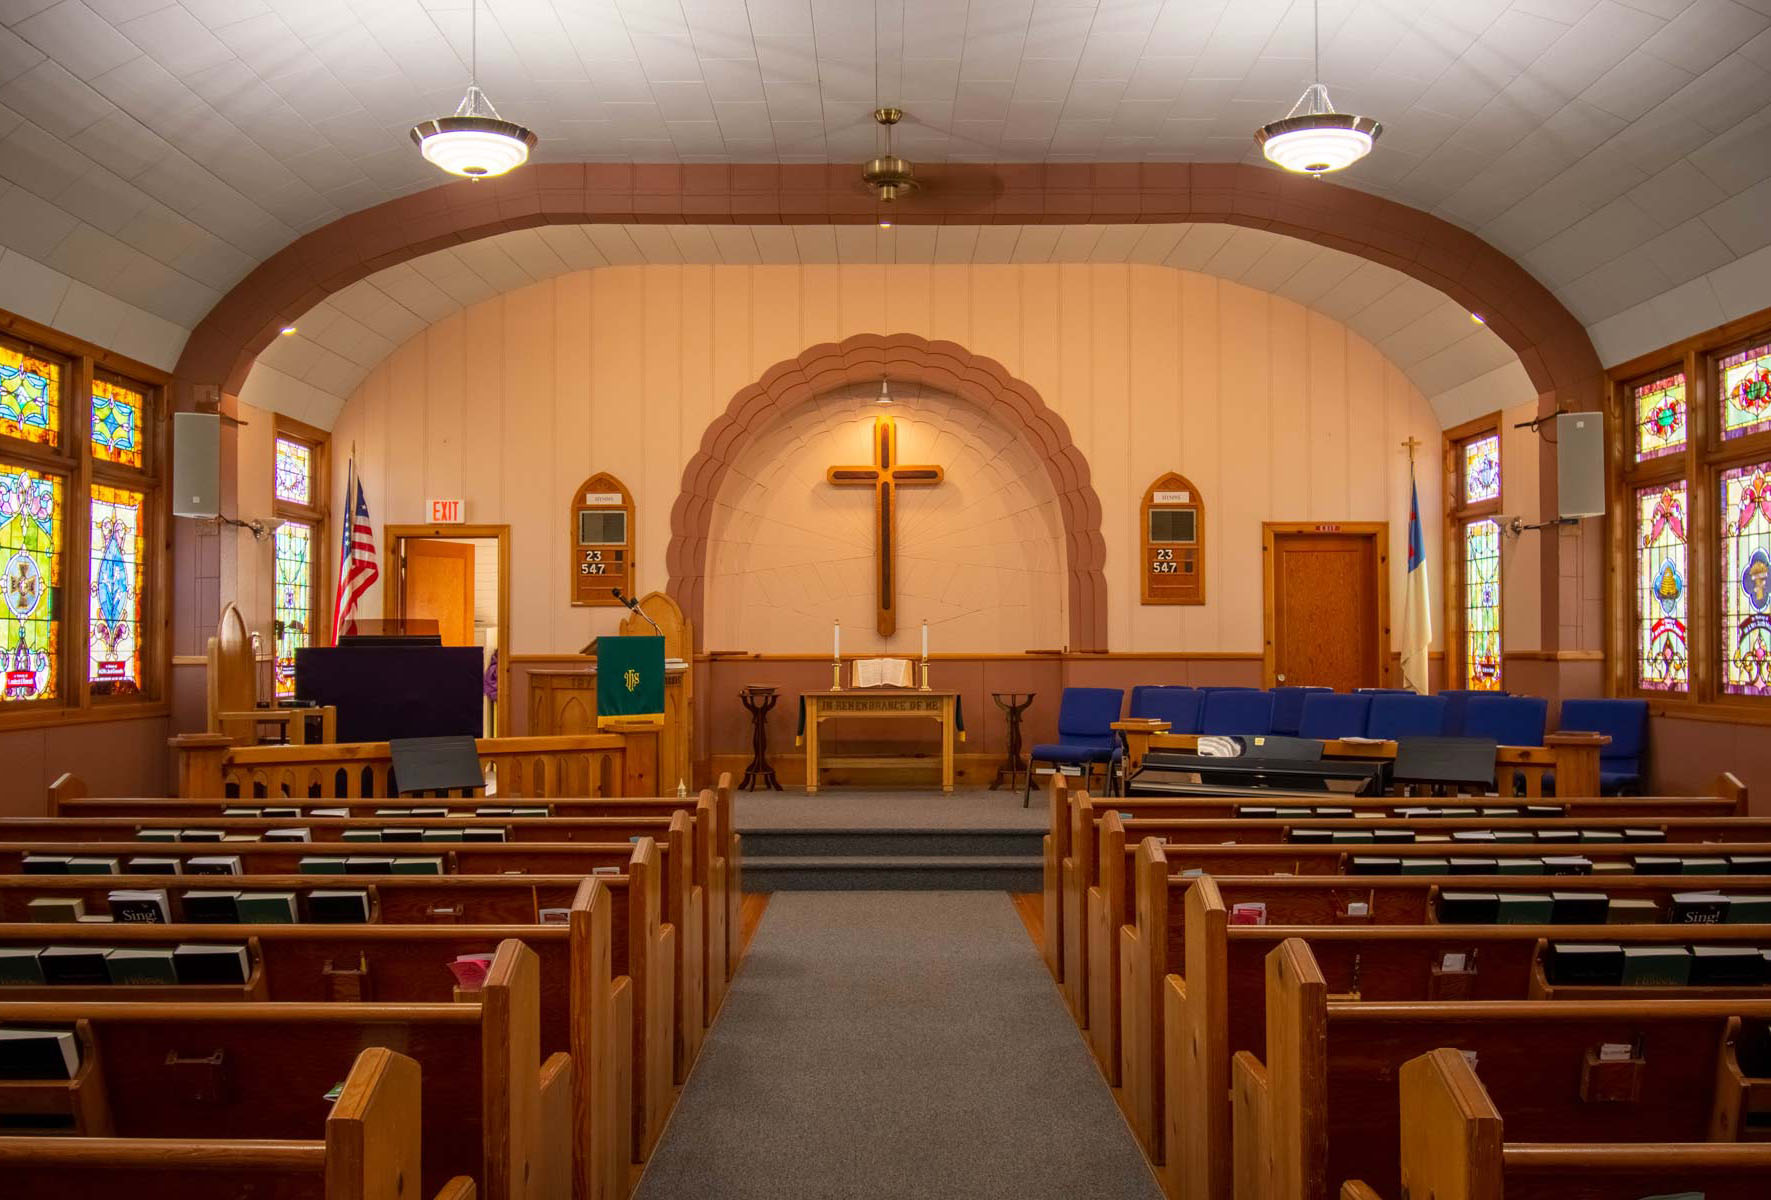 Inside the church, with 7 pews on each side of a middle aisle, a cross on the far wall, stain-glass windows on each side, blue choir chairs on the stage at front, a podium with a microphone, and the U.S. flag in the left corner and church flag in the other